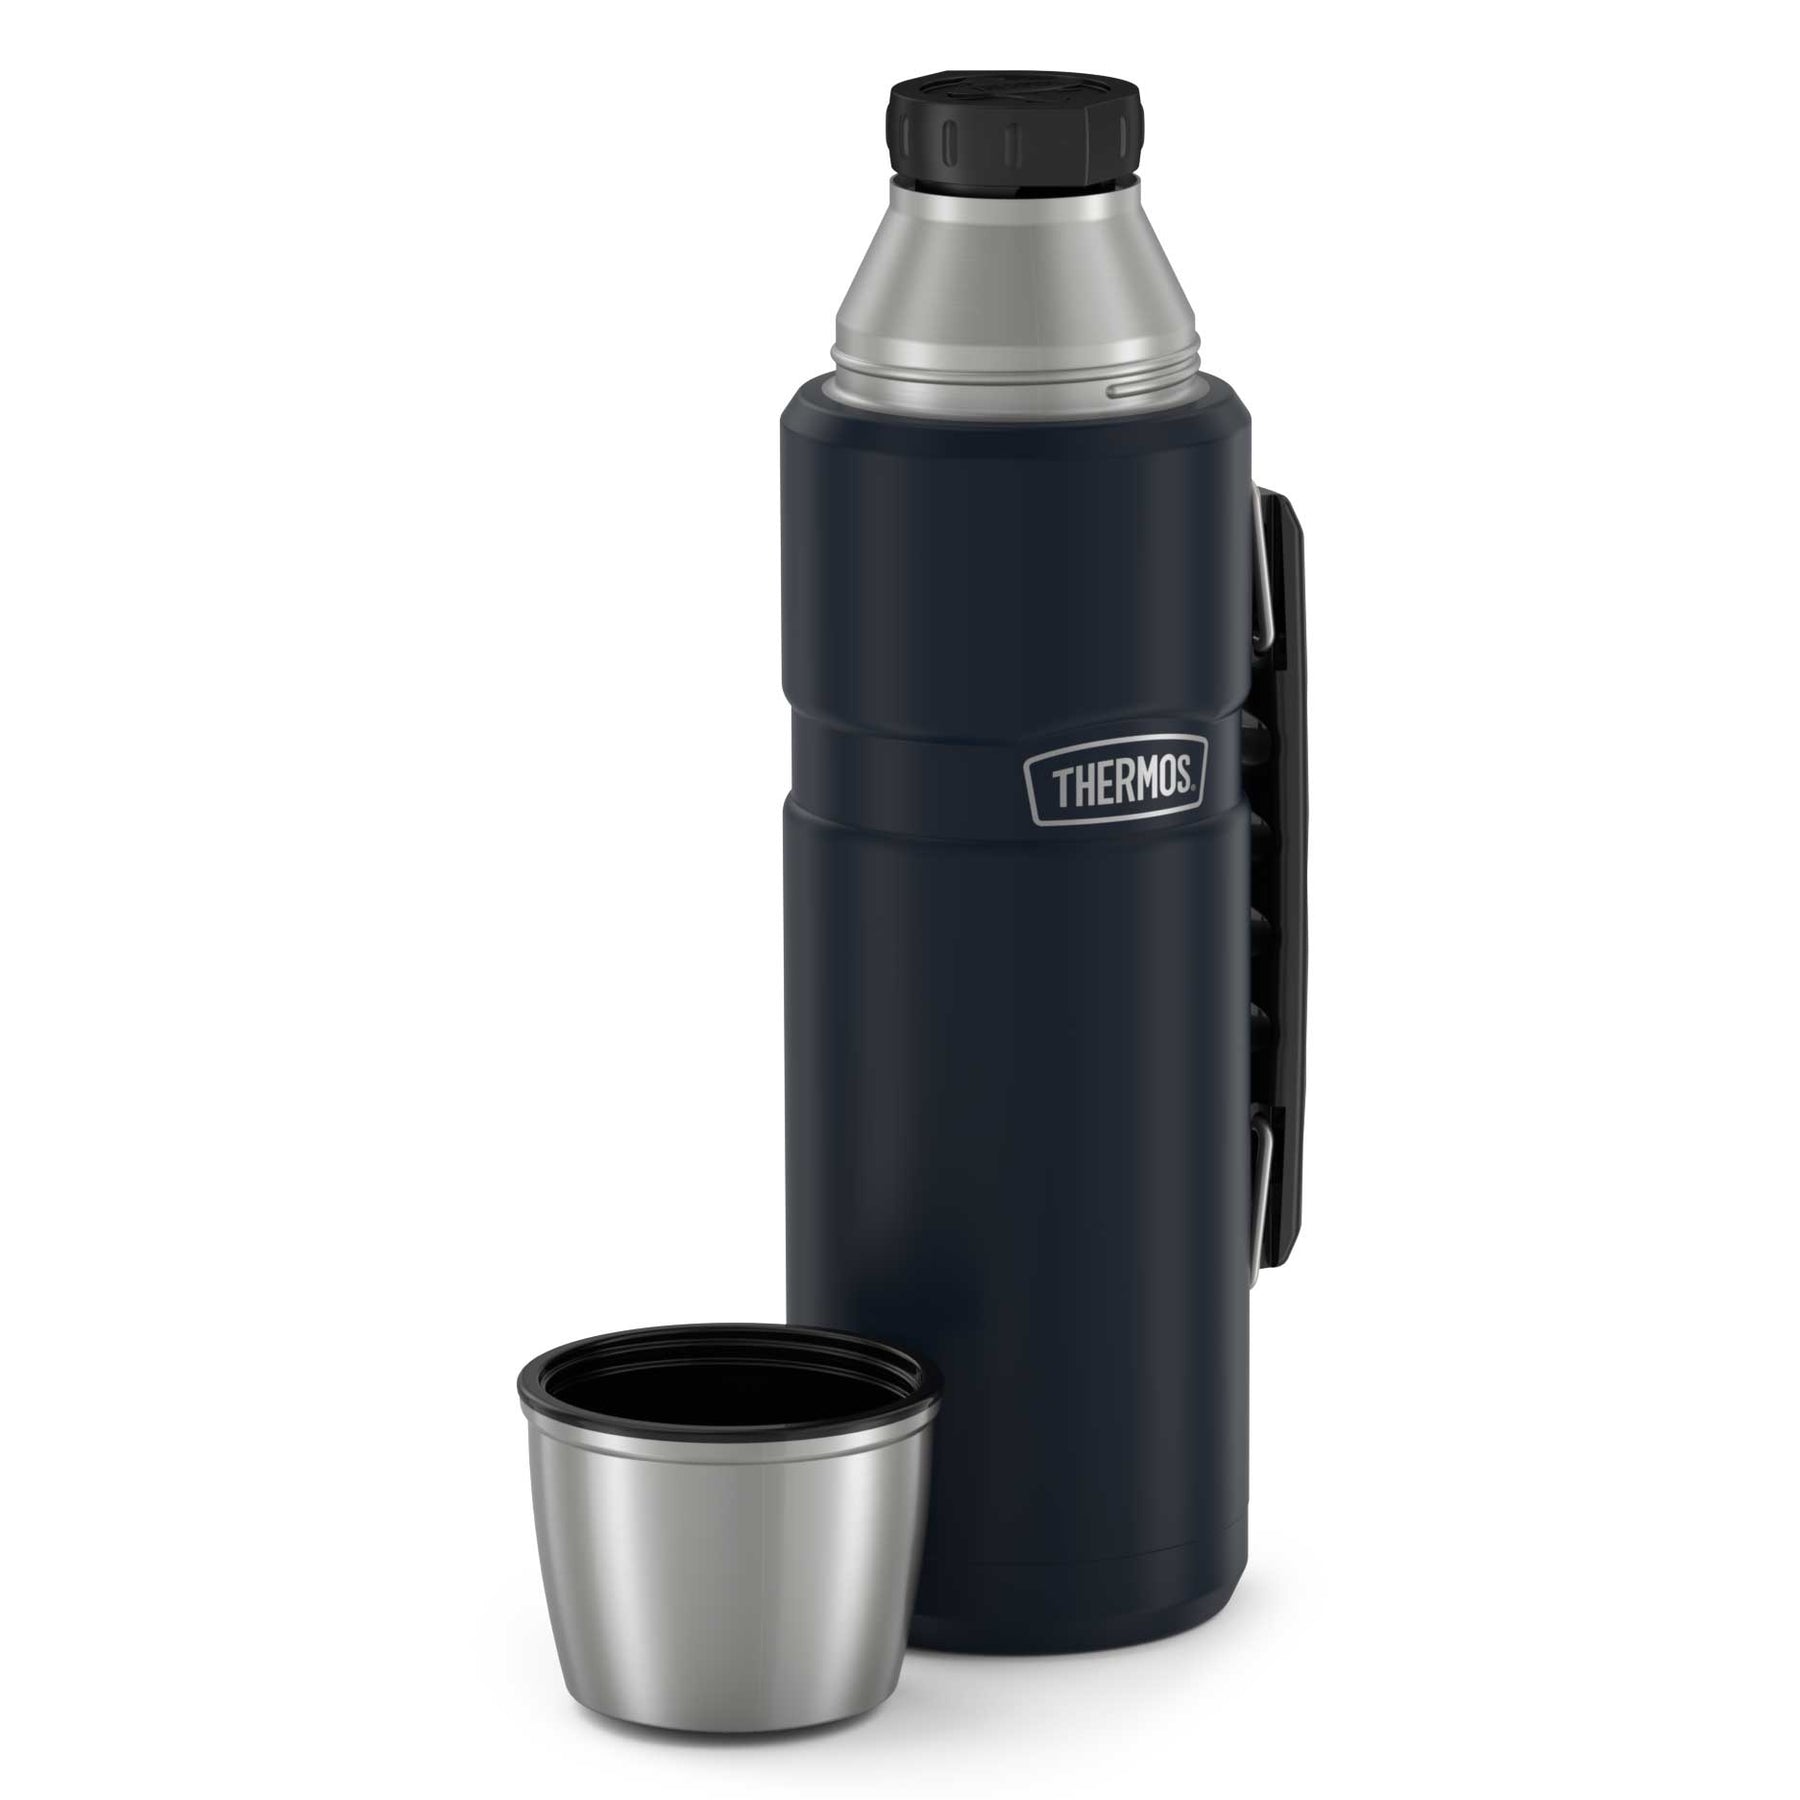 Stainless Steel kaliber Hot Thermos Flask, Capacity: Approx 750ml